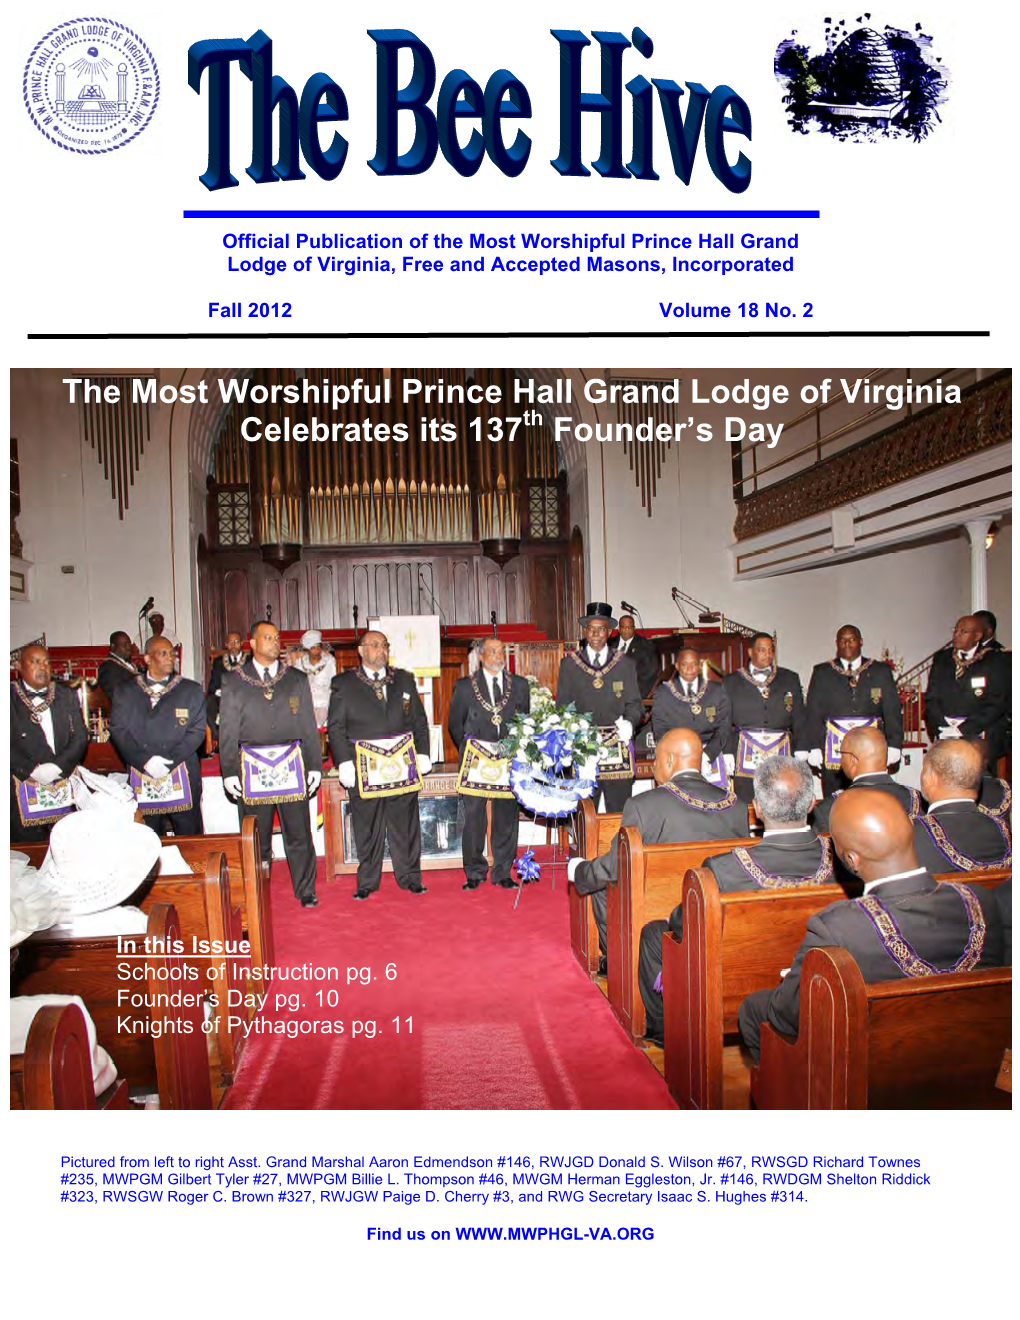 The Most Worshipful Prince Hall Grand Lodge of Virginia Celebrates Its 137 Founder's